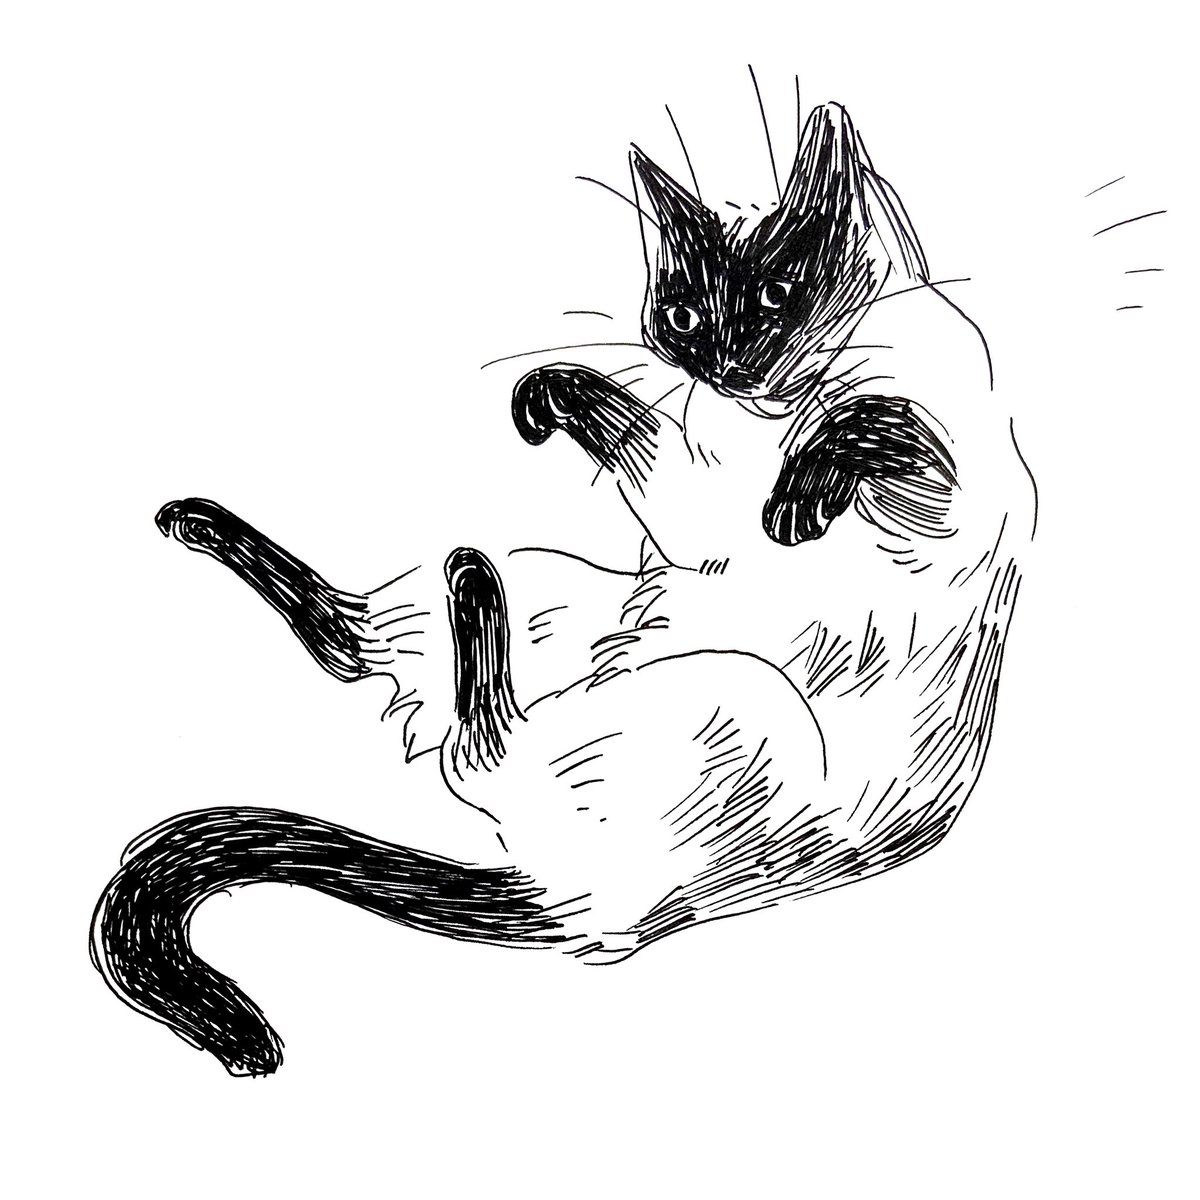 I'll be sketching cats this weekend! Make a $30+ donation to a BLM charity of your choice and comment with a timestamped screencap below + a pic of the cat I should draw (can be your pet or any other cat, you decide) ? 
Only new donations! 
https://t.co/kRg5PBPJPi 